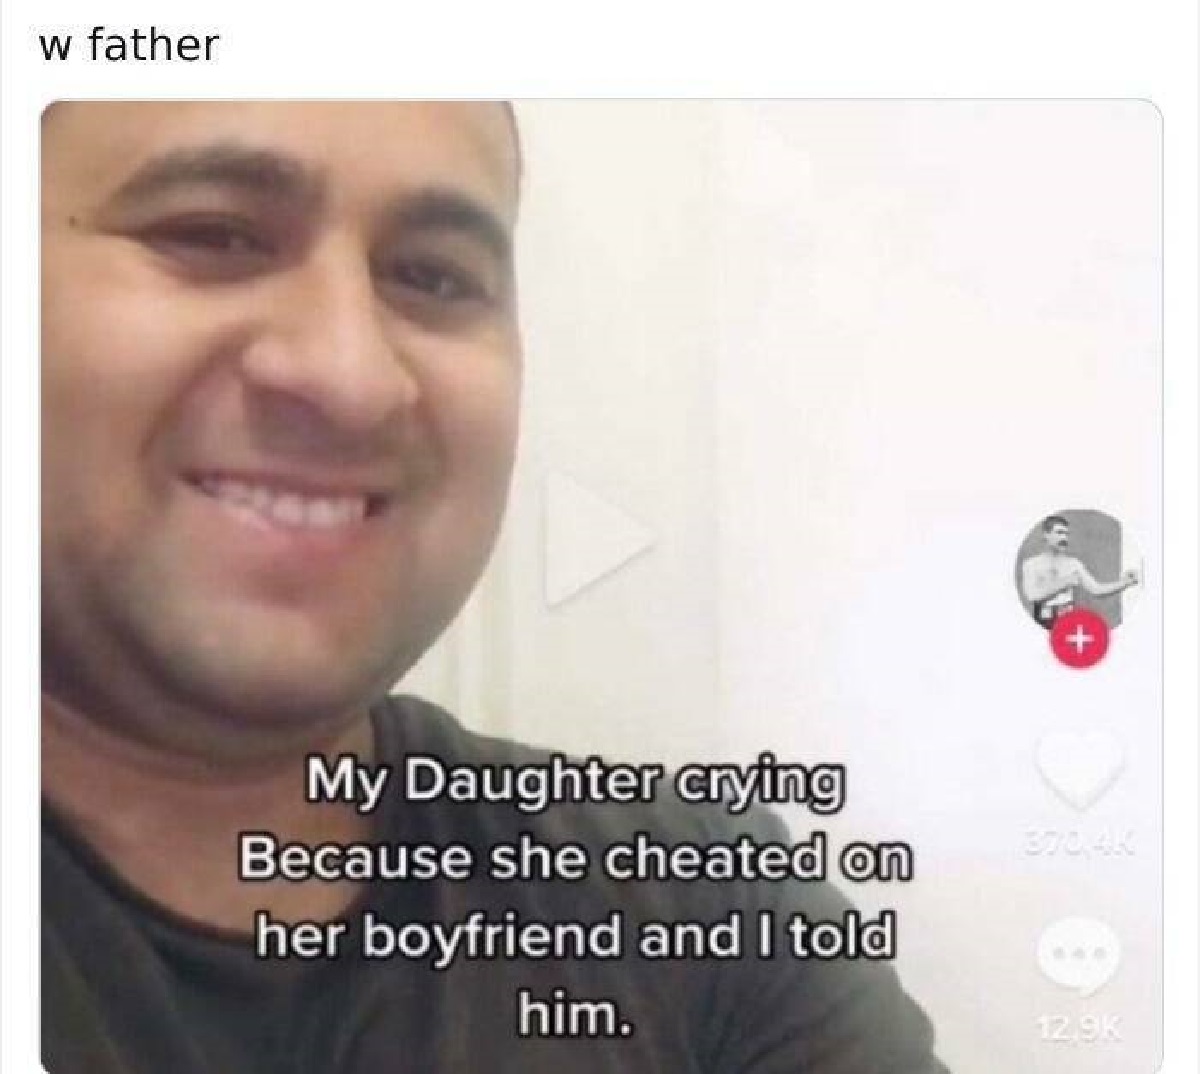 wild tiktok screenshots - w father My Daughter crying Because she cheated on her boyfriend and I told him.